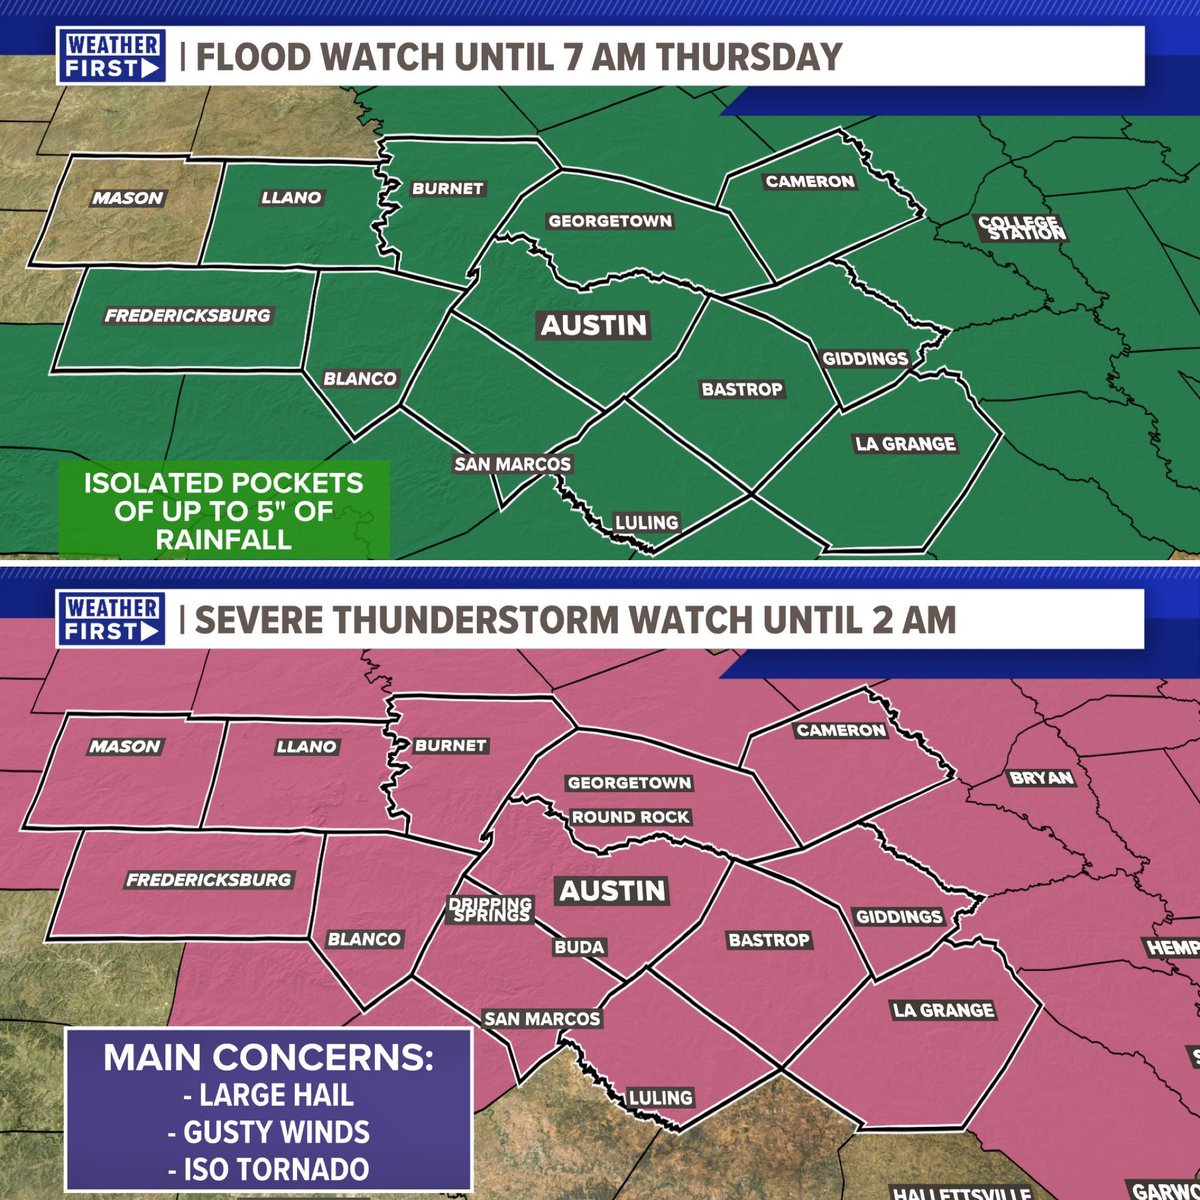 The flood and severe risk continue for the KVUE area overnight. A Flood Watch is in effect until 7 AM Thursday with localized 3”-5”+ rainfall totals. A Severe Thunderstorm Watch is in effect until 2 AM for hail, wind, and isolated tornado potential. #kvue #atxwx